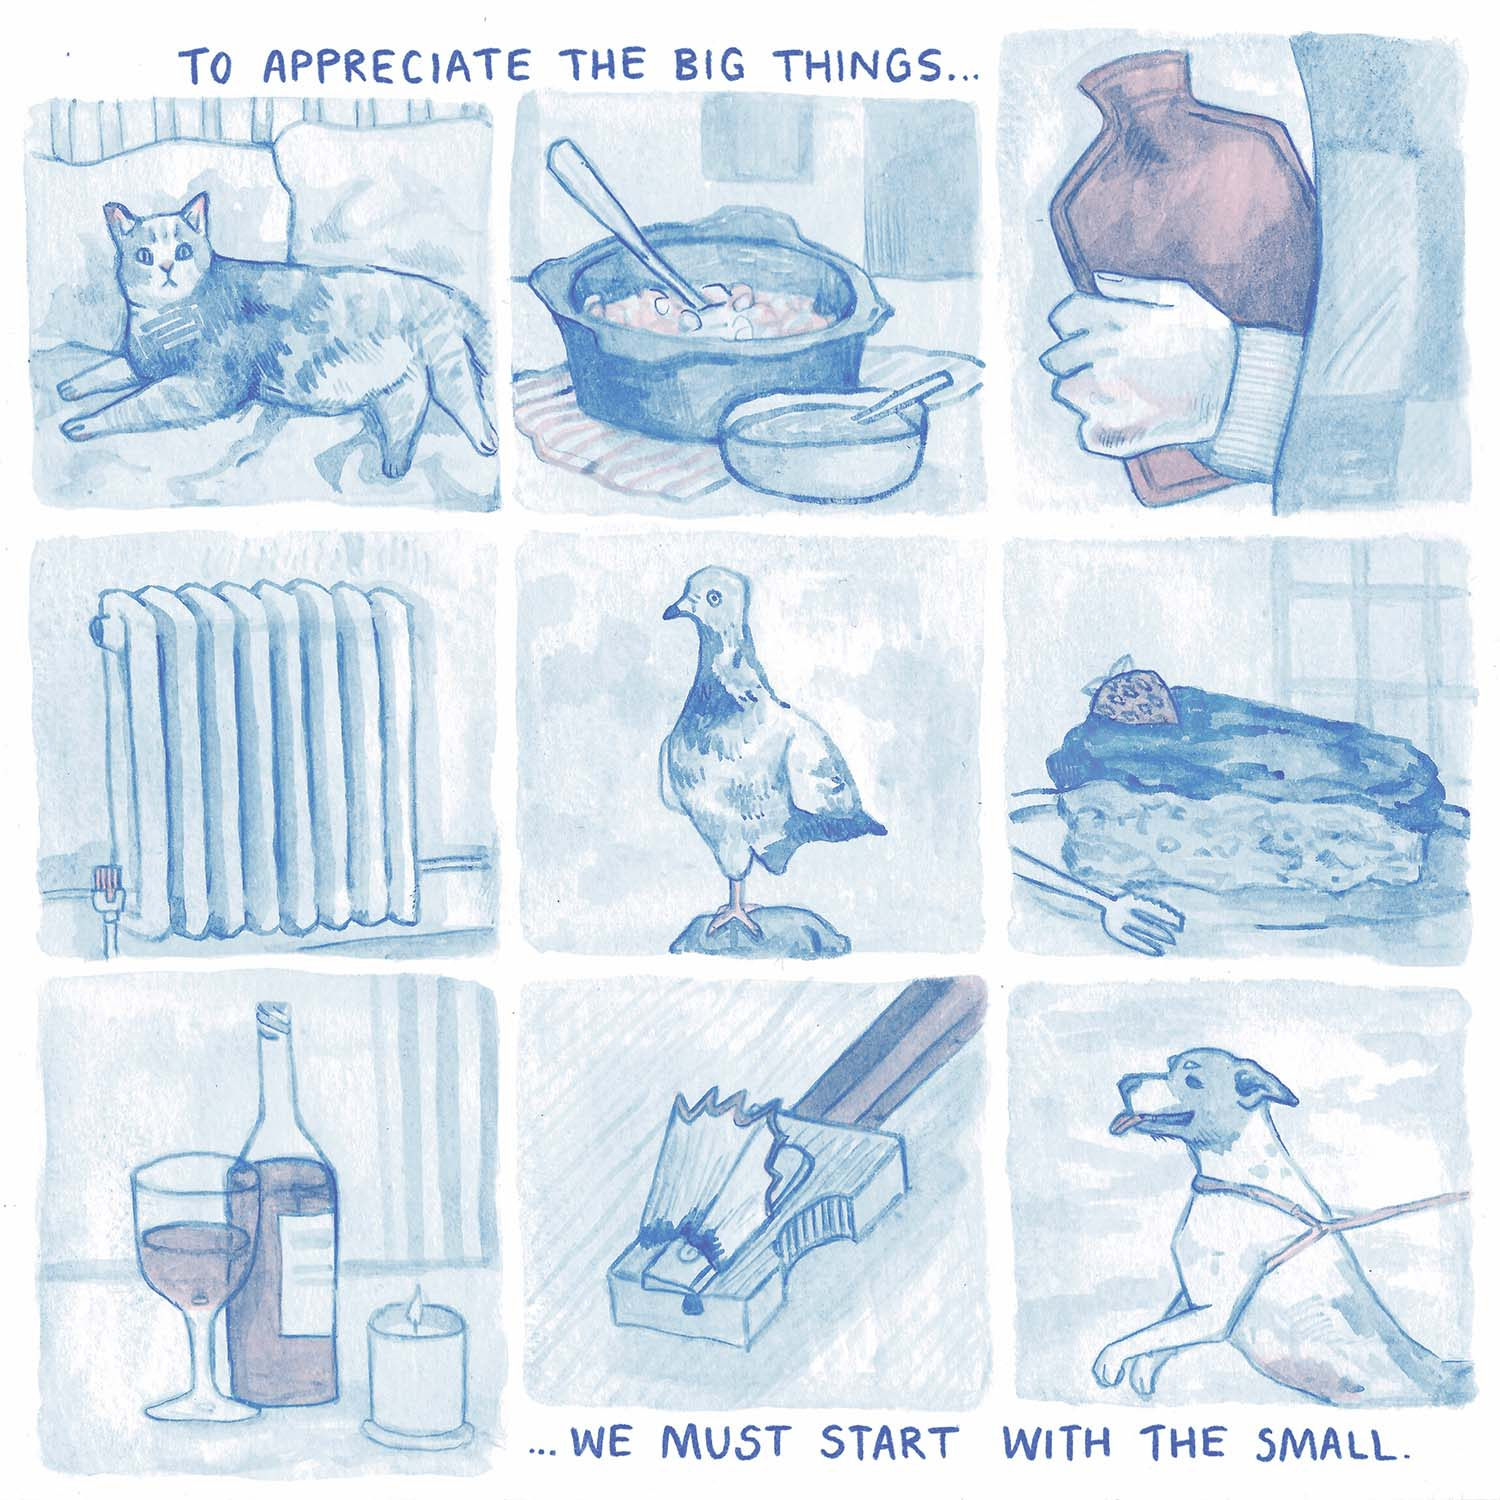 Short format comic about appreciating the small joys in life.